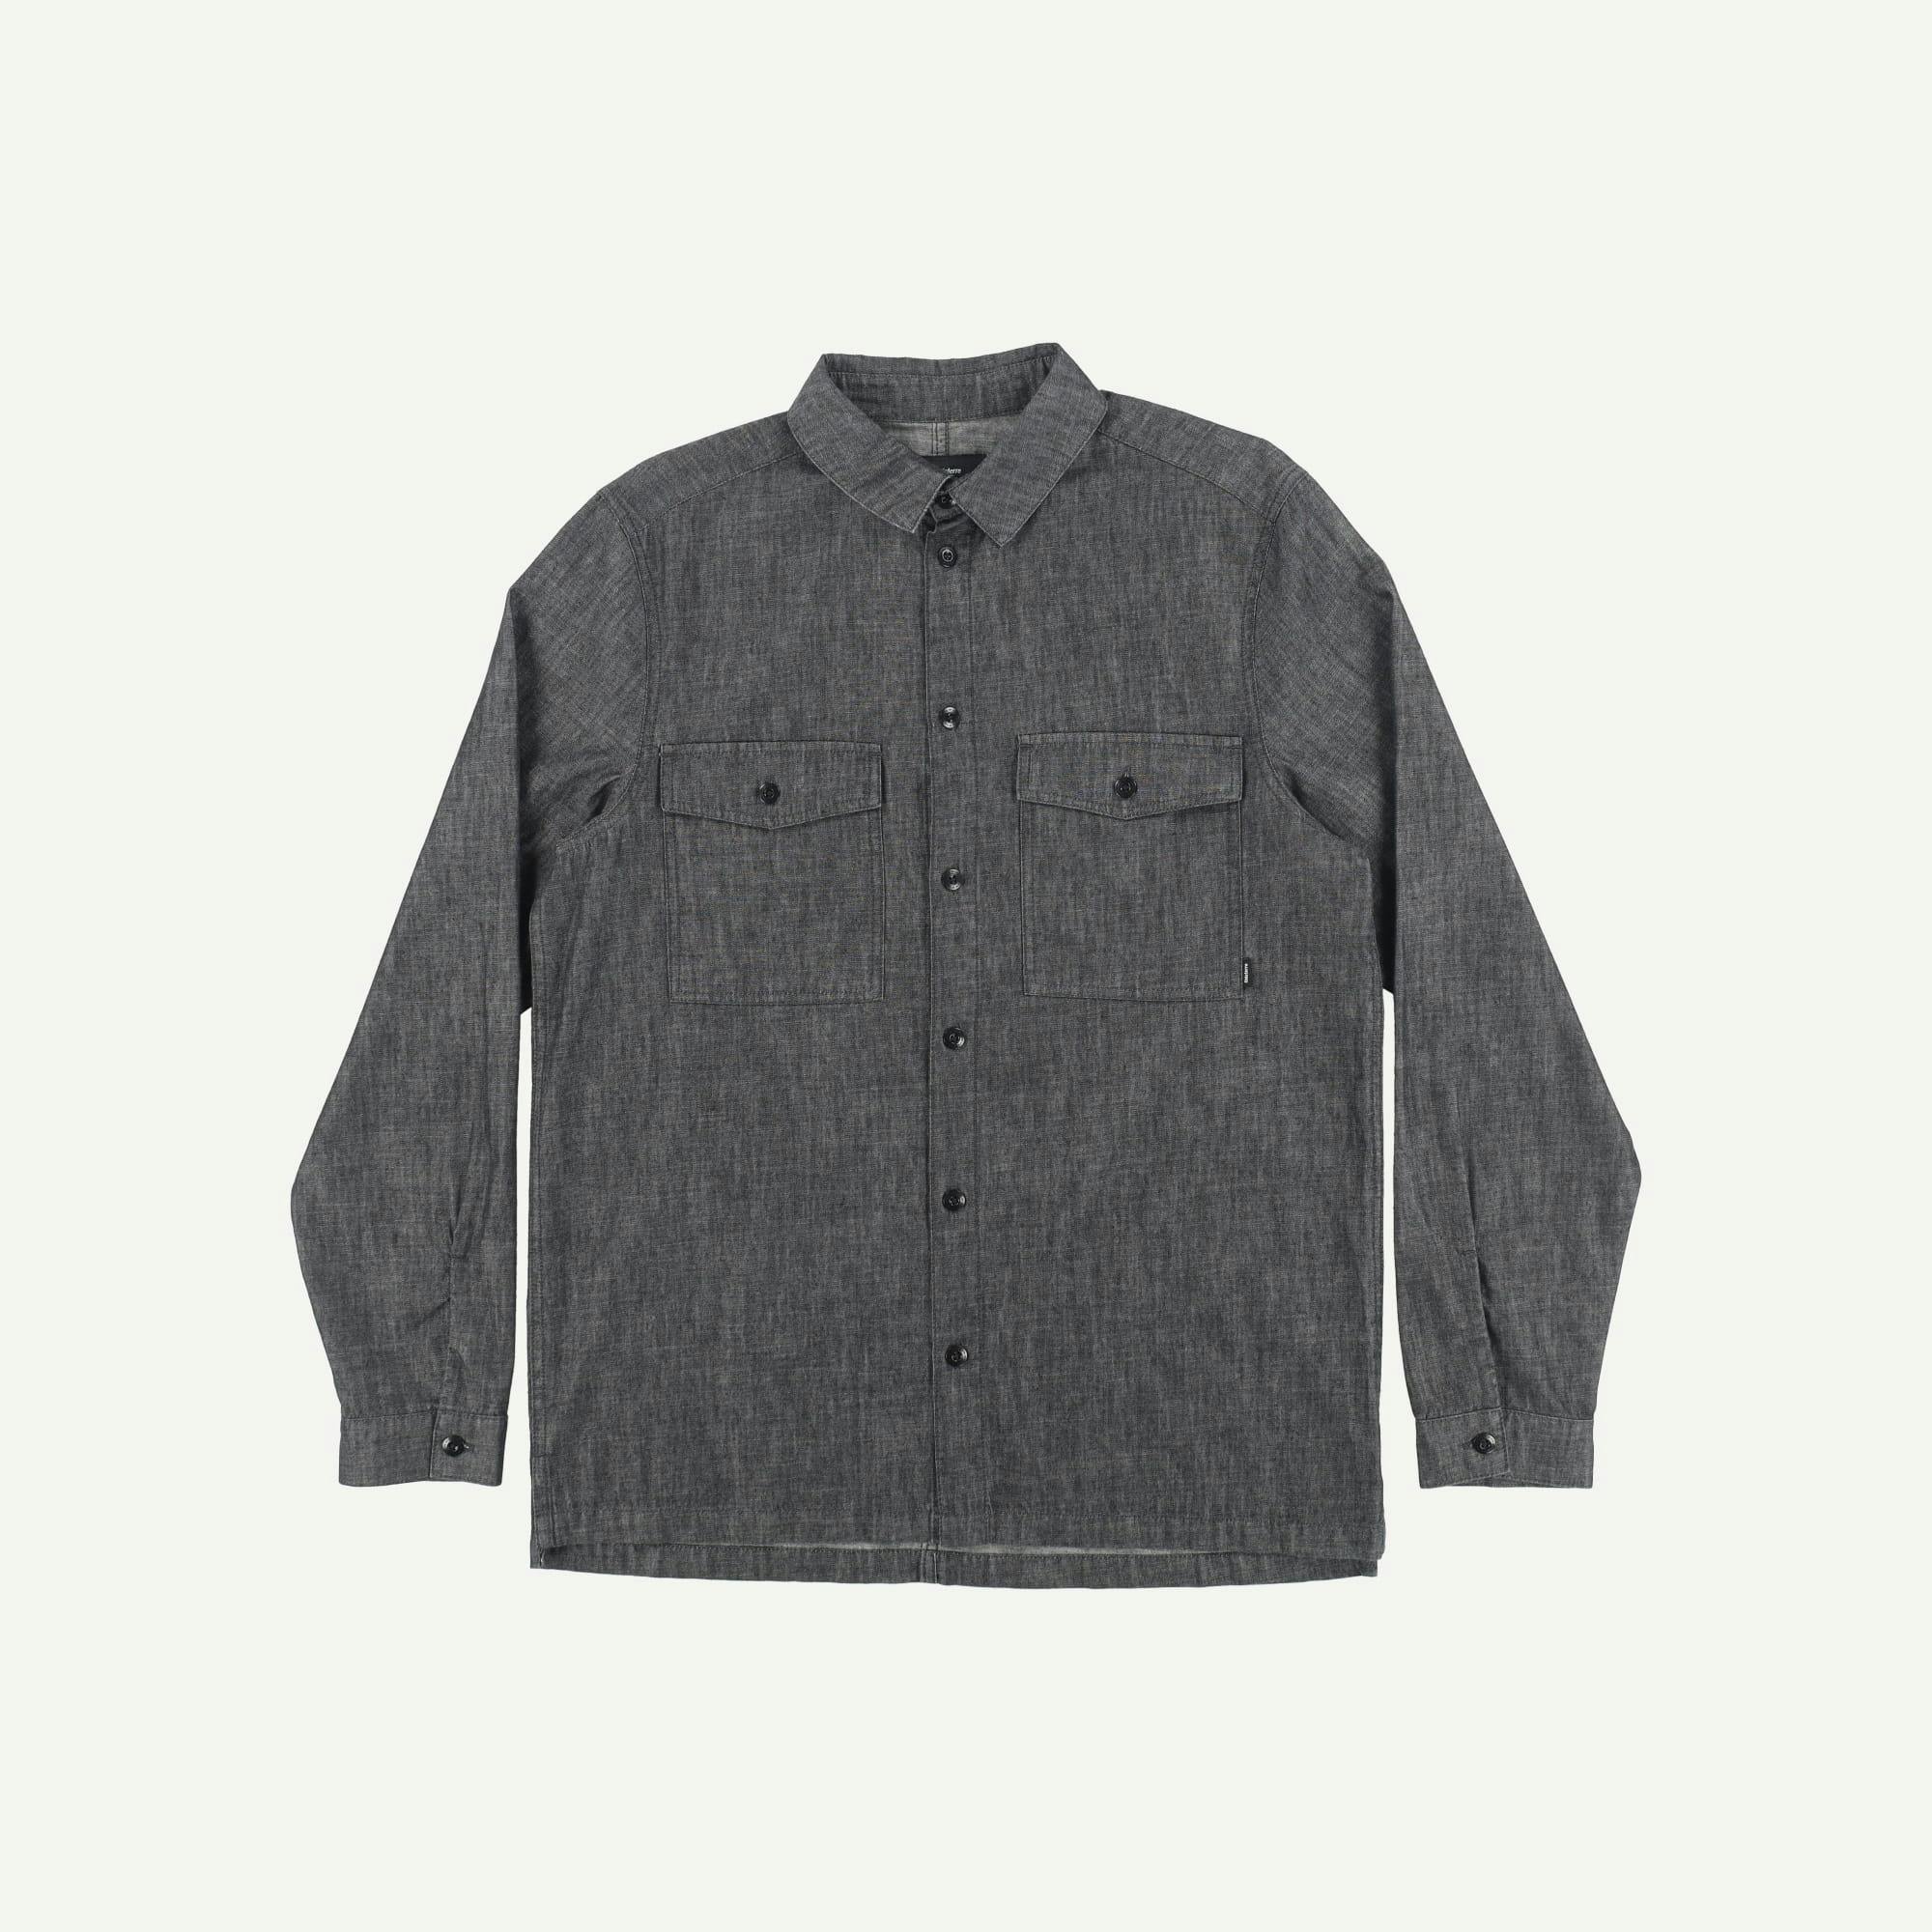 Finisterre As new Grey Shirt